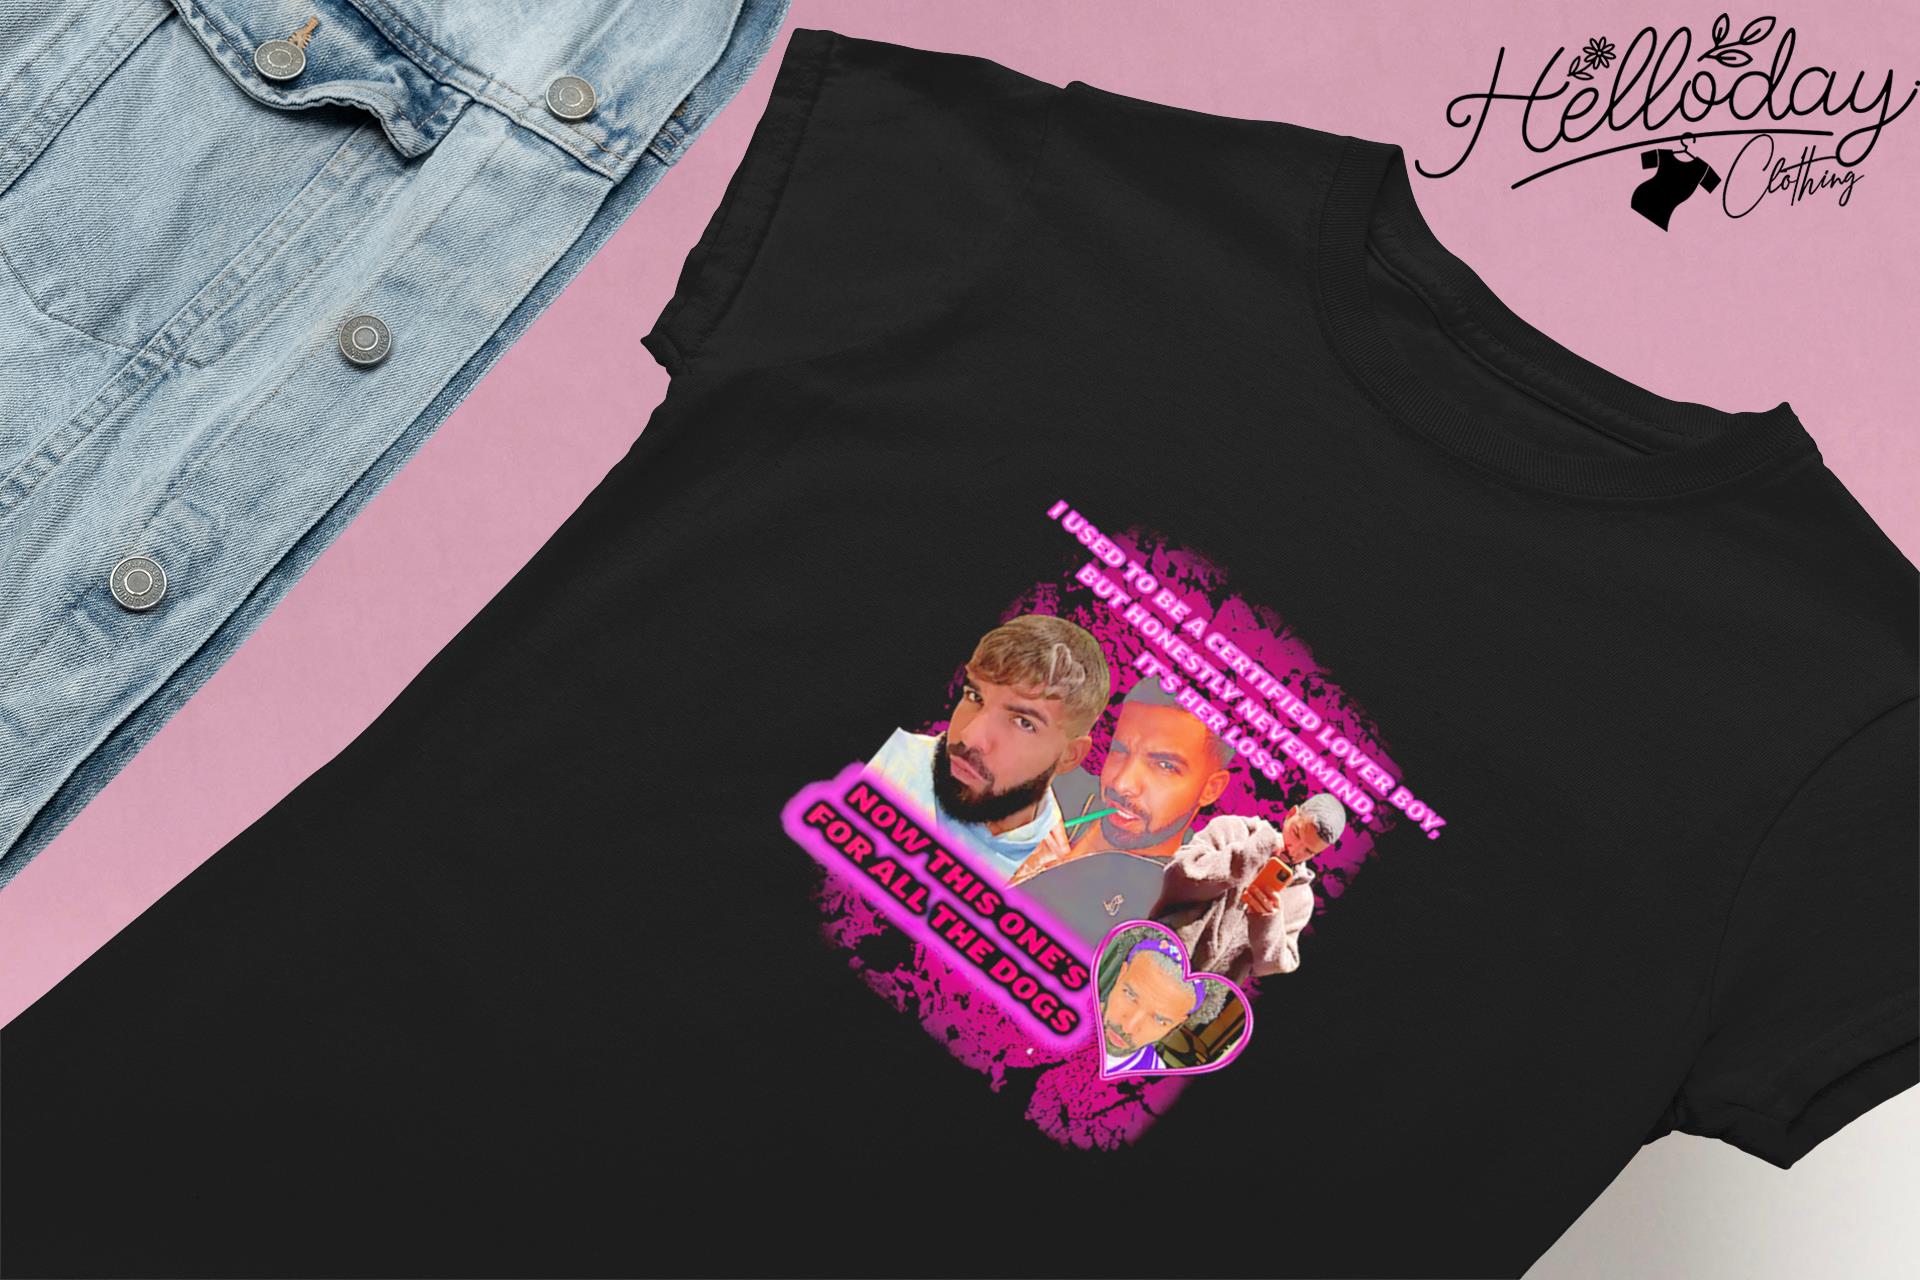 I Used To Be A Certified Lover Boy But Honestly Nevermind It's Her Loss Now  This One's For All The Dogs T Shirt, Custom prints store